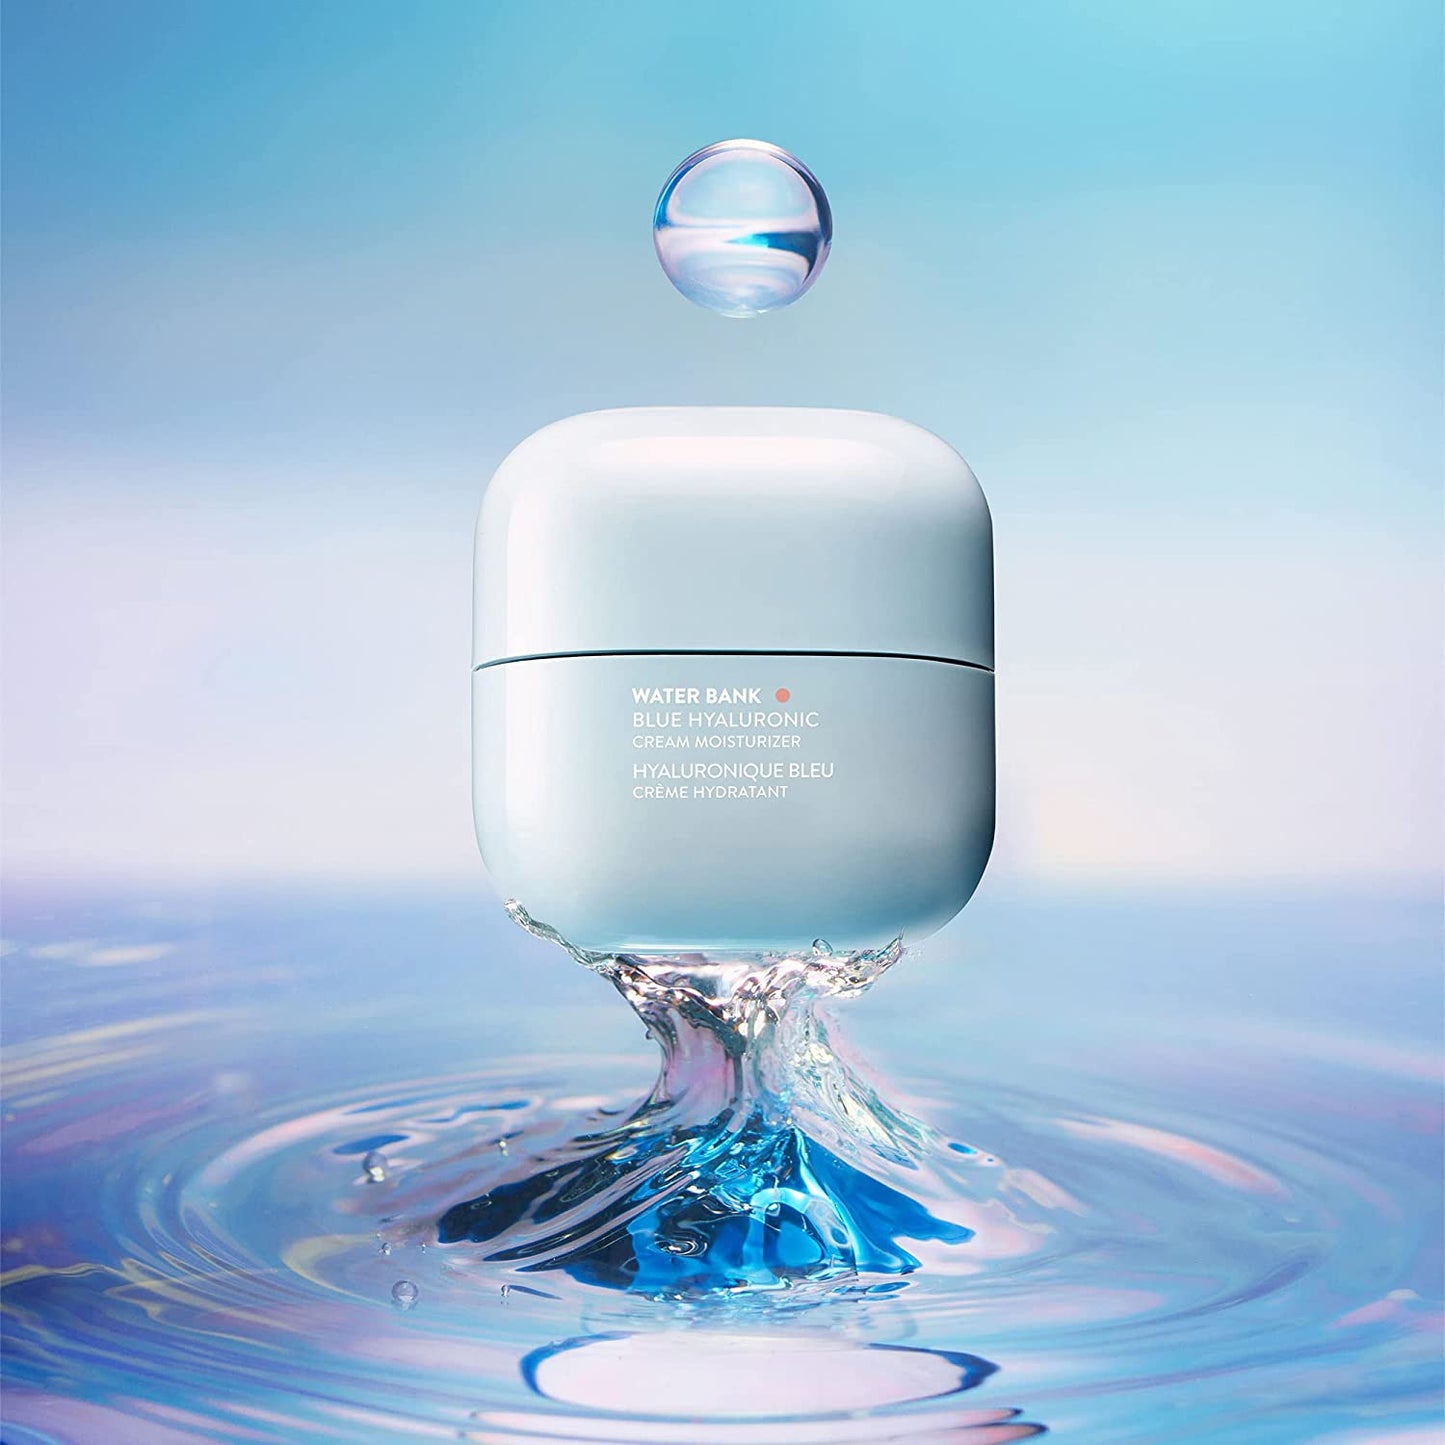 LANEIGE Water Bank Blue Hyaluronic Cream Moisturizer: Hydrate and Nourish/Soothe